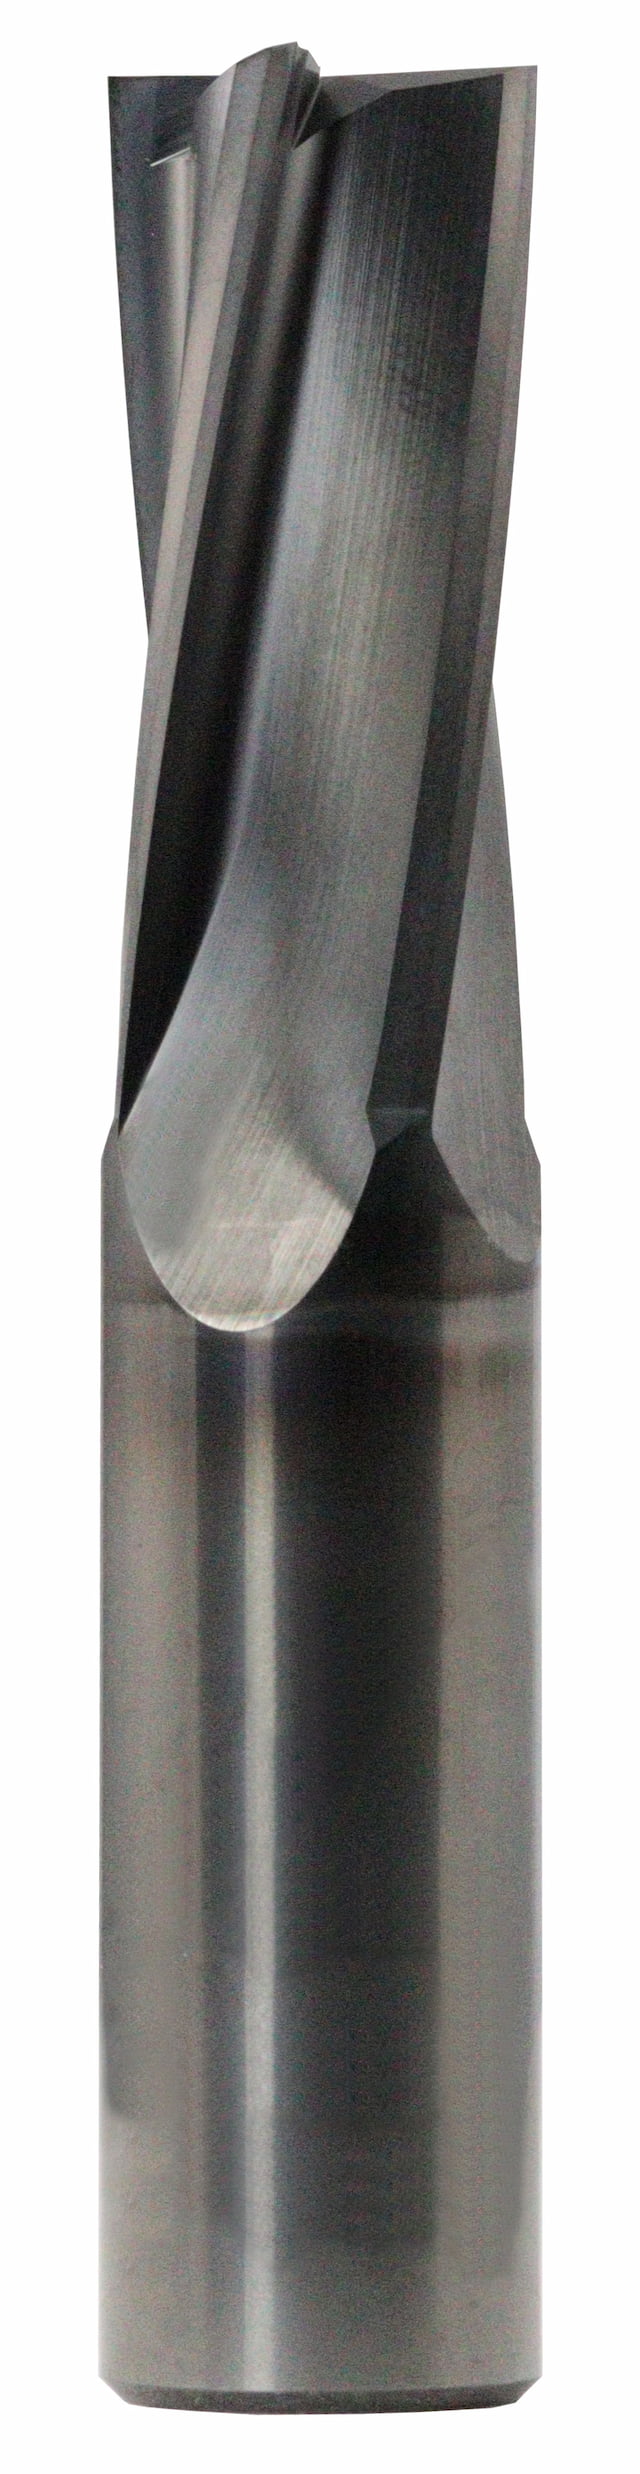 16.00mm Dia, 4 Flute, Square End End Mill - 83064